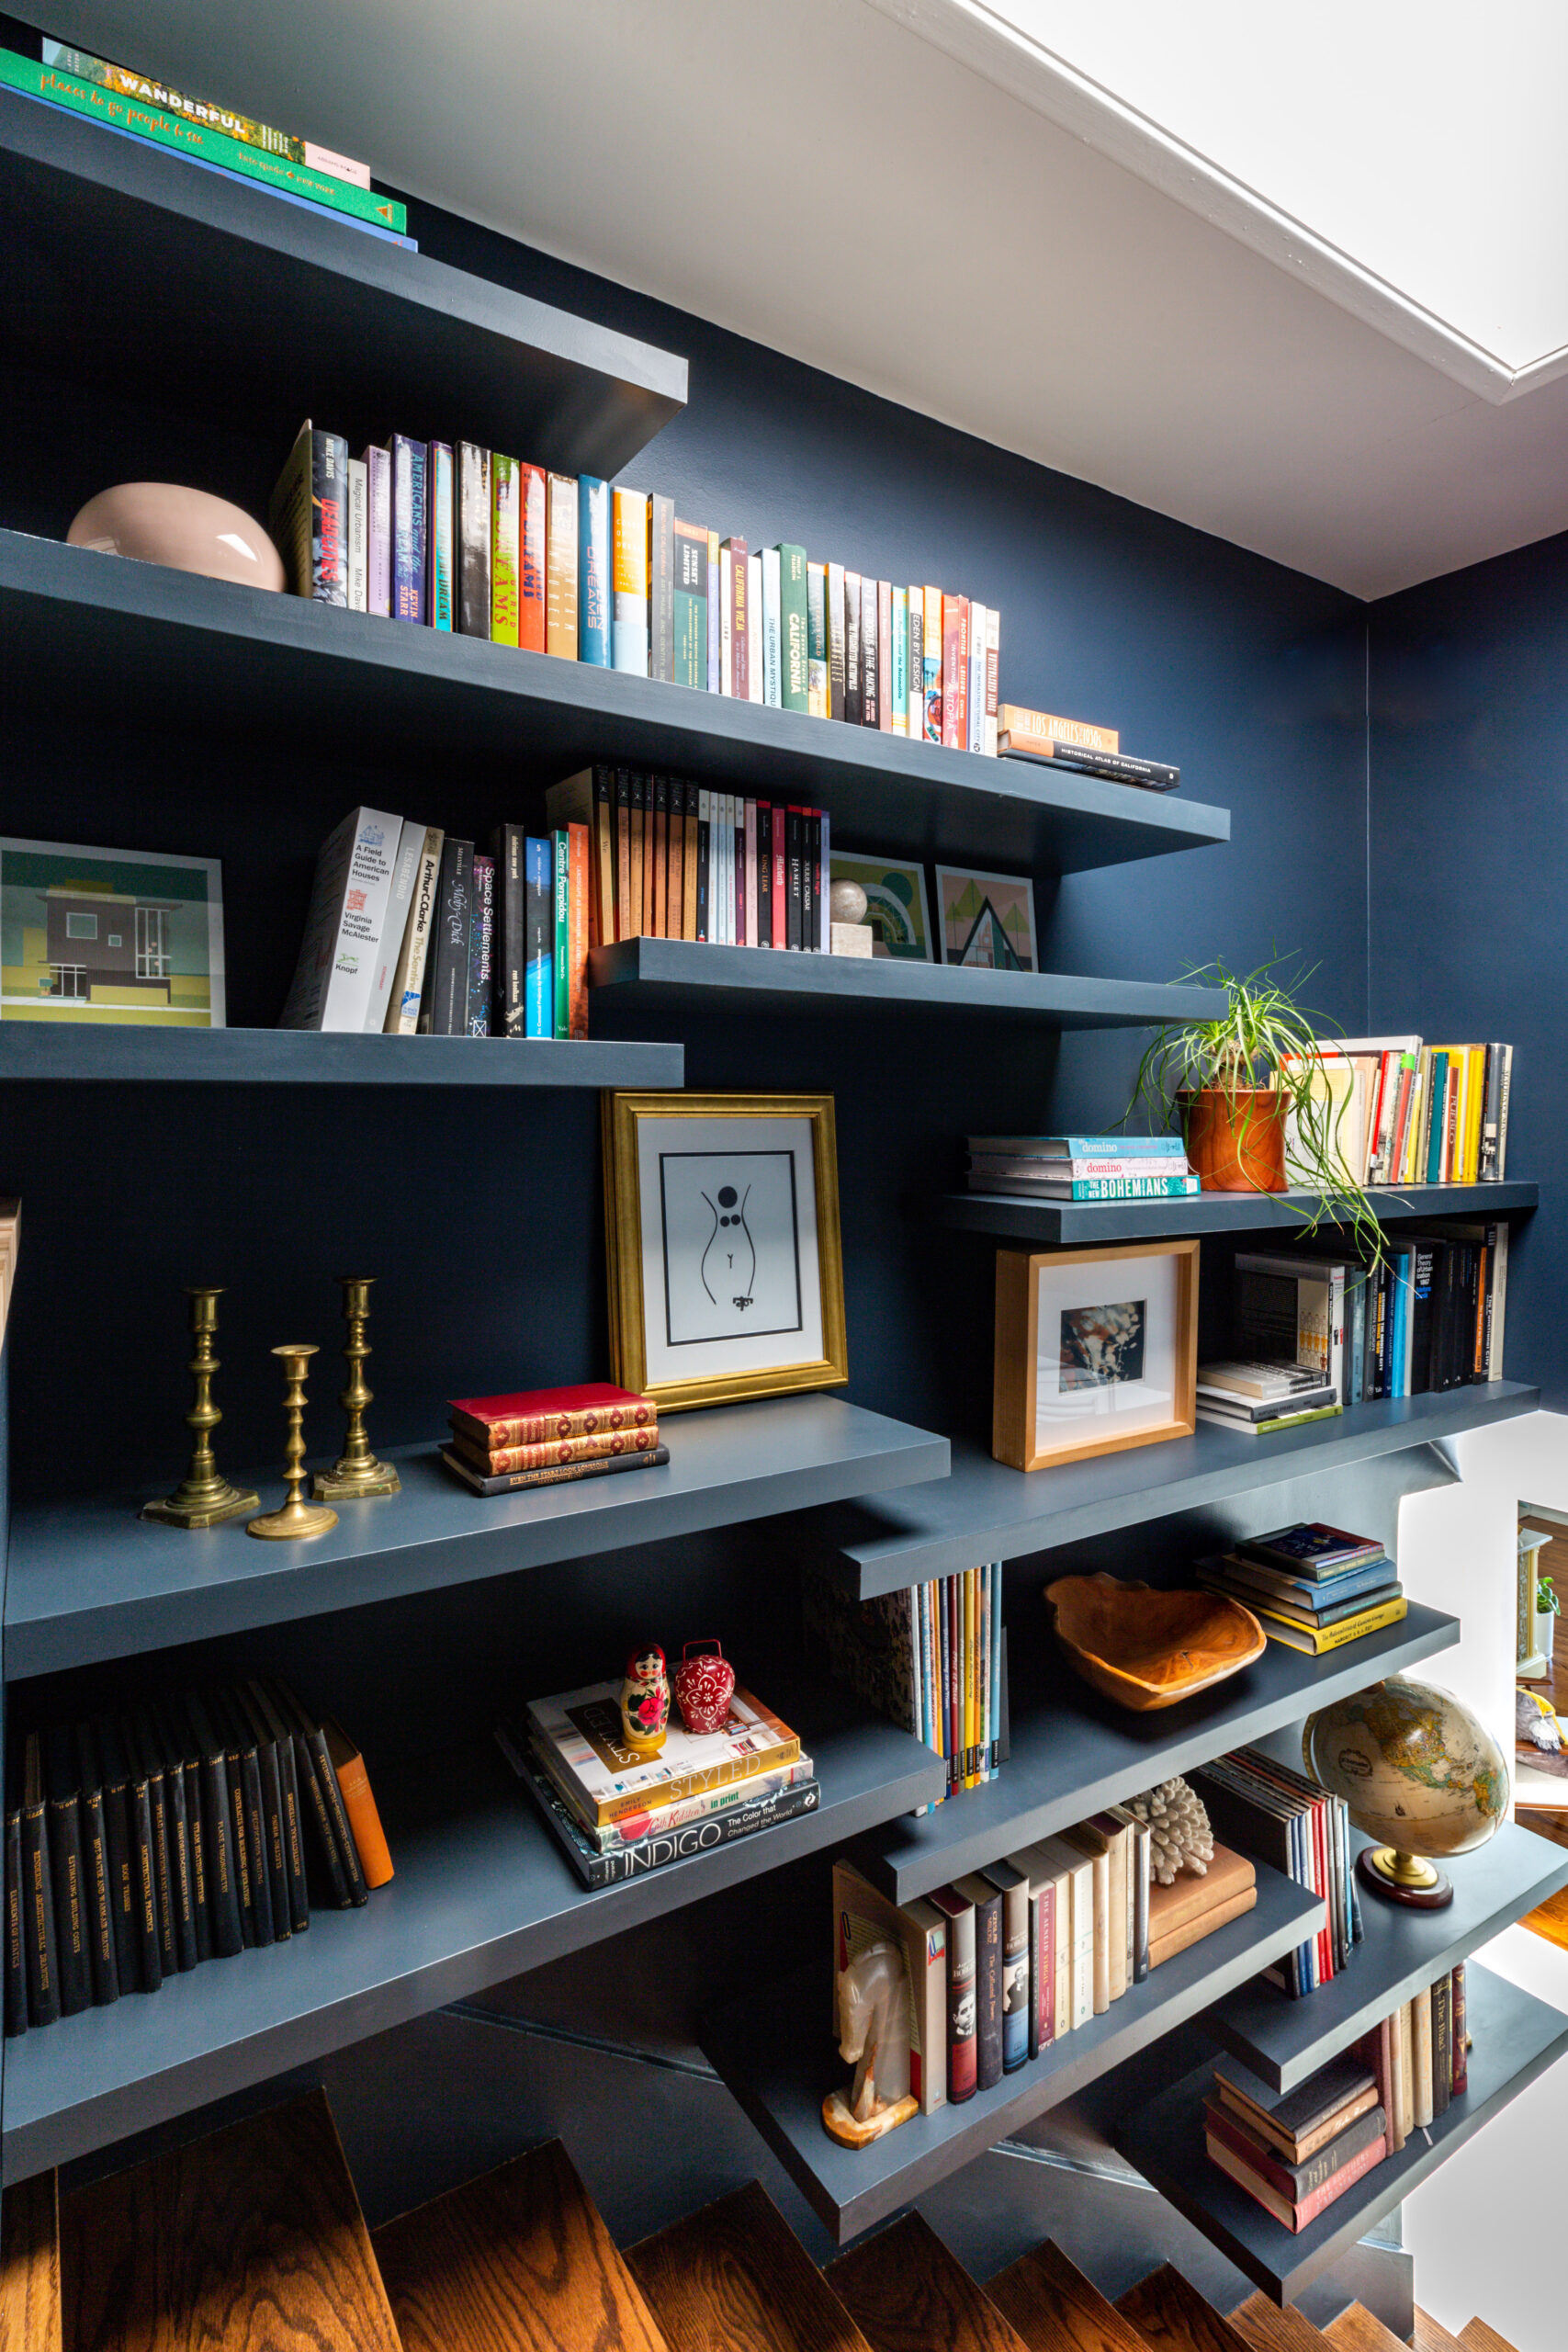 Blue shelves lined with books in a stairwell